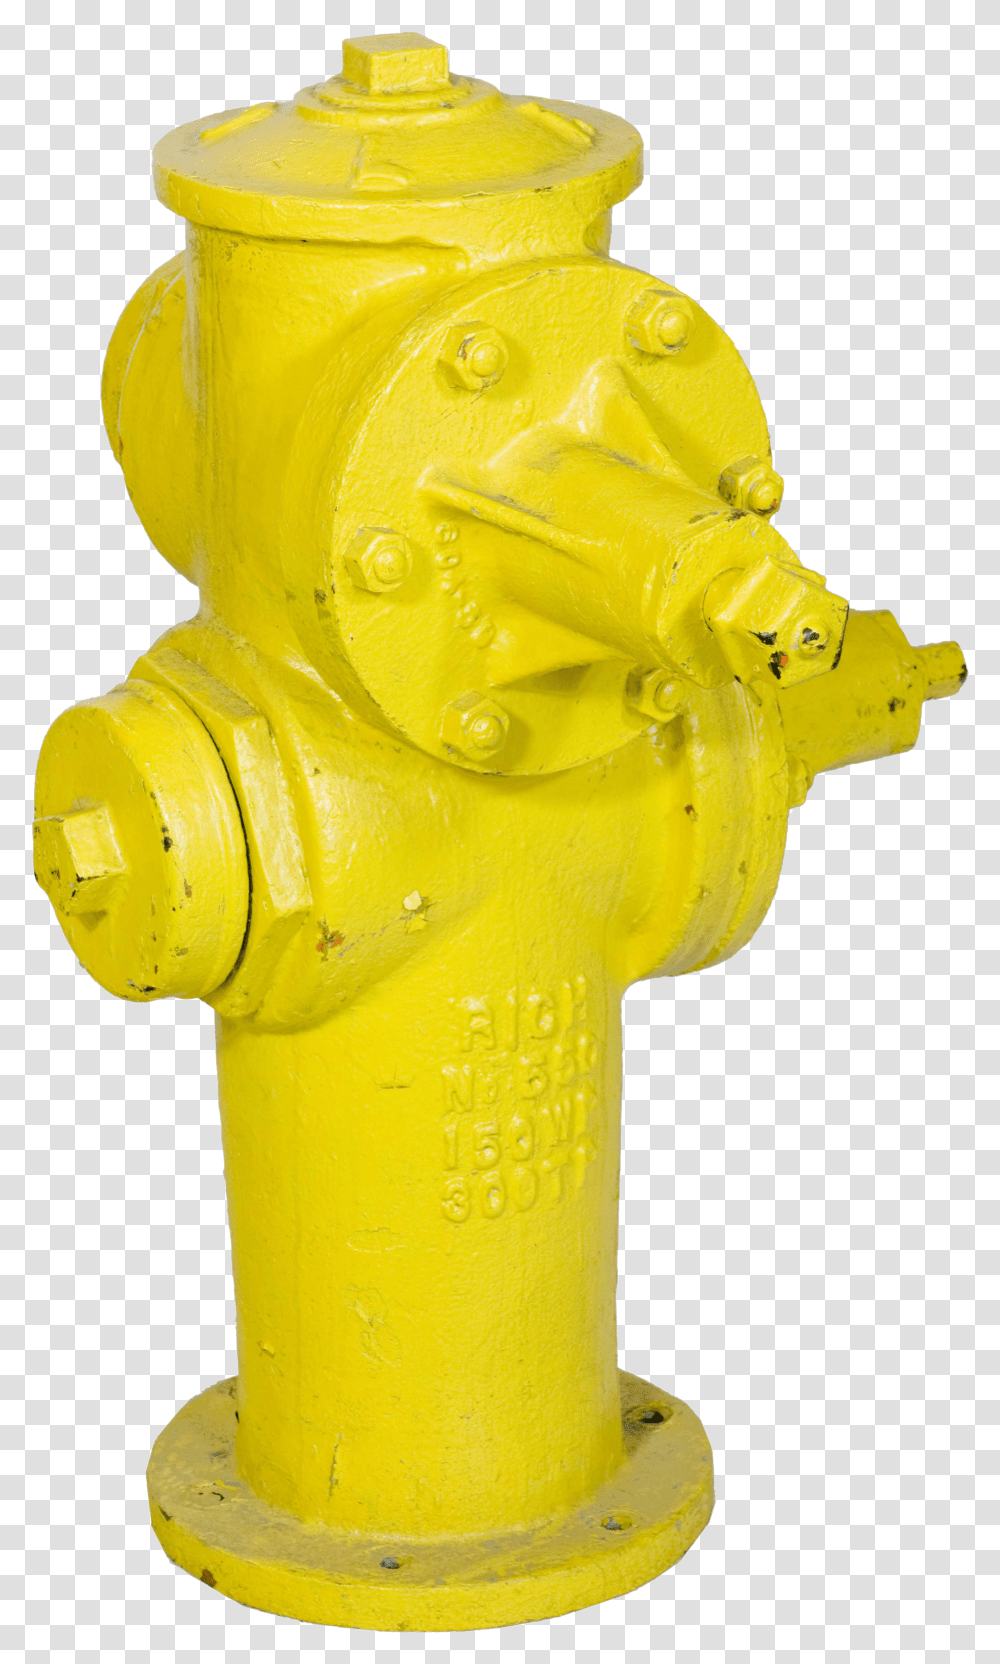 Fire Hydrant Clipart Background Yellow Fire Hydrant Clipart Transparent Png